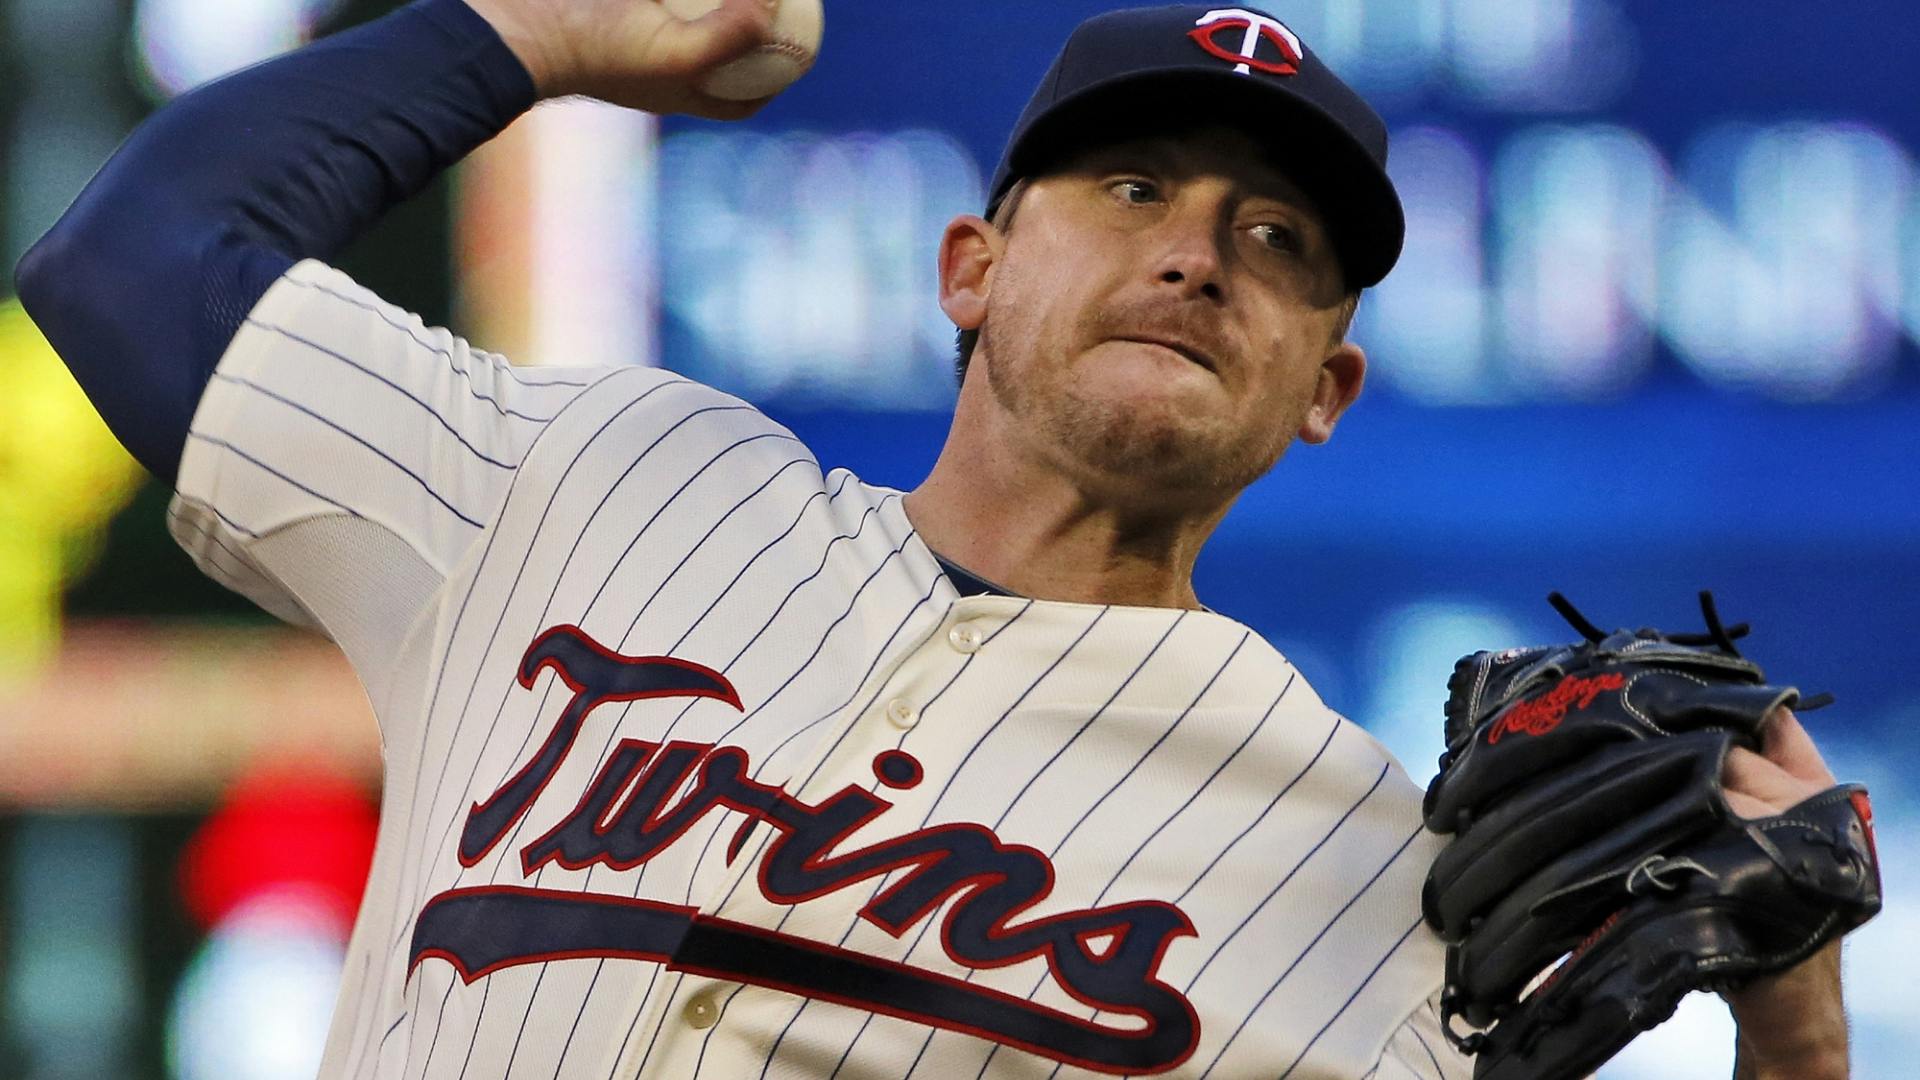 Twins righthander goes seven innings Monday but gives up four runs against Texas.